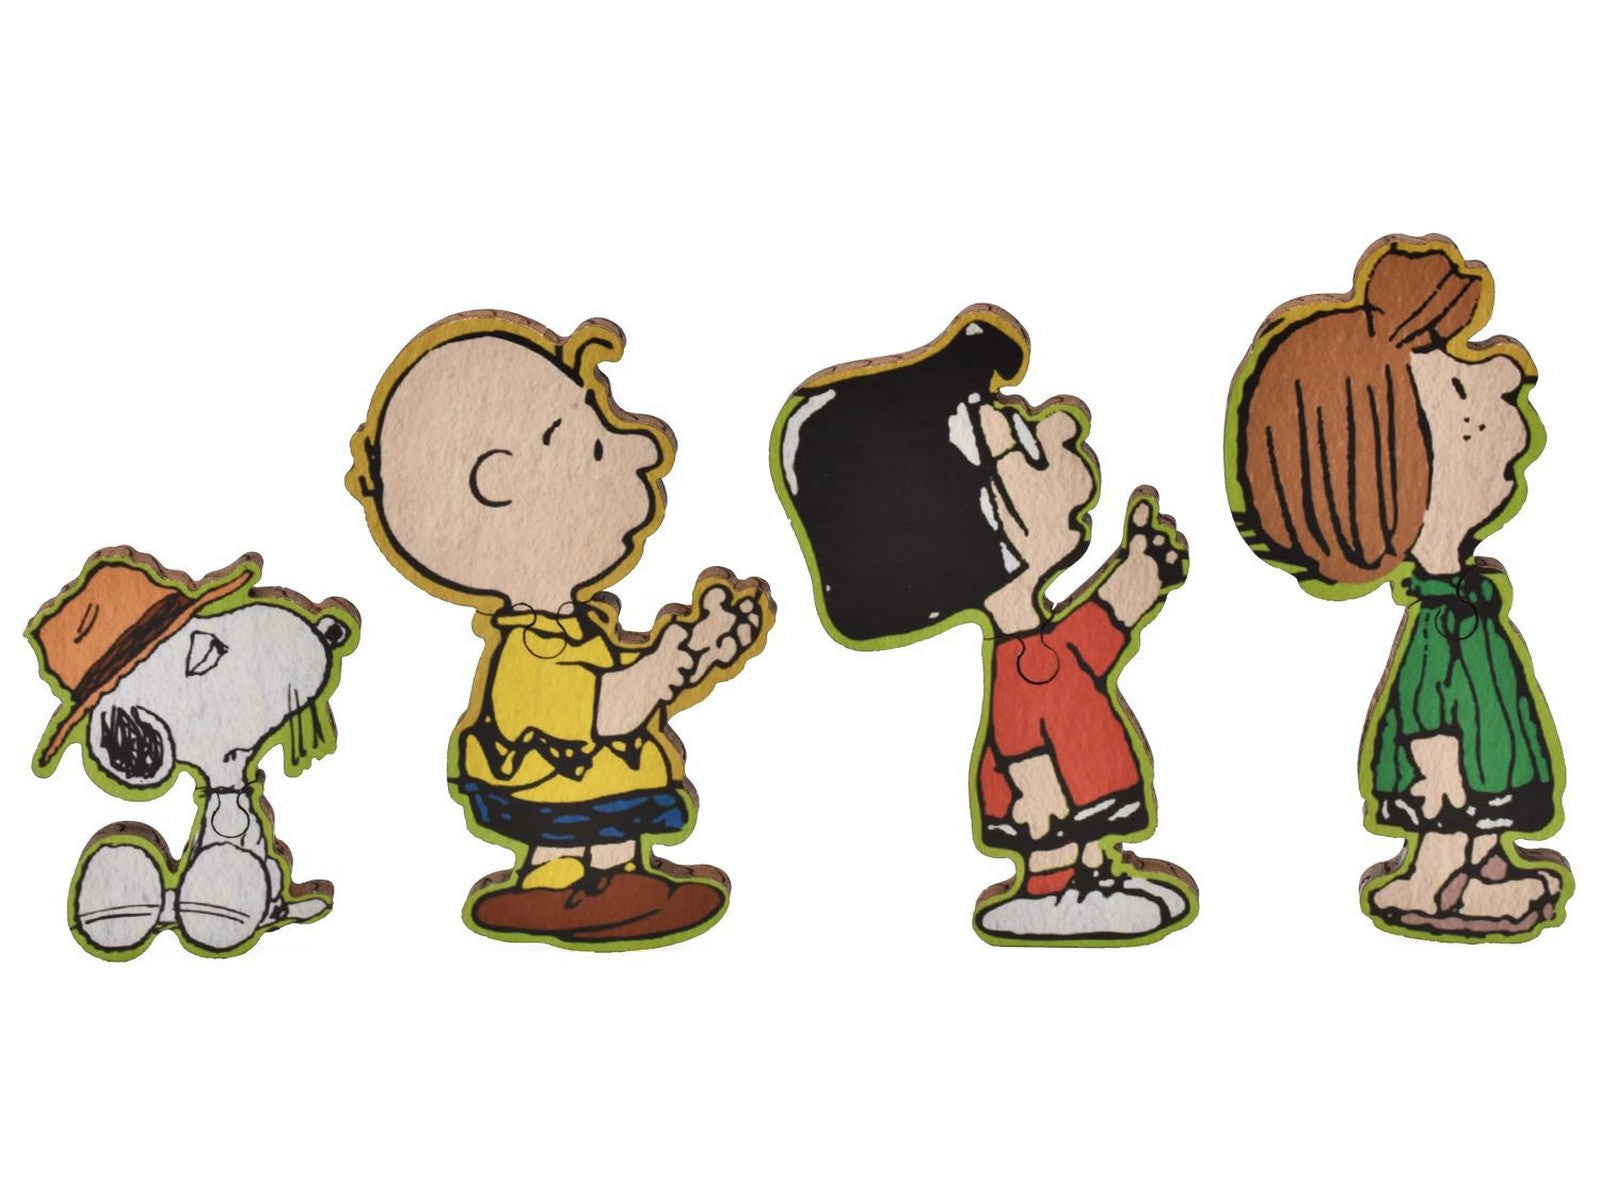 A closeup of pieces in the shape of Spike, Charlie, Marcie, and Peppermint Patty.